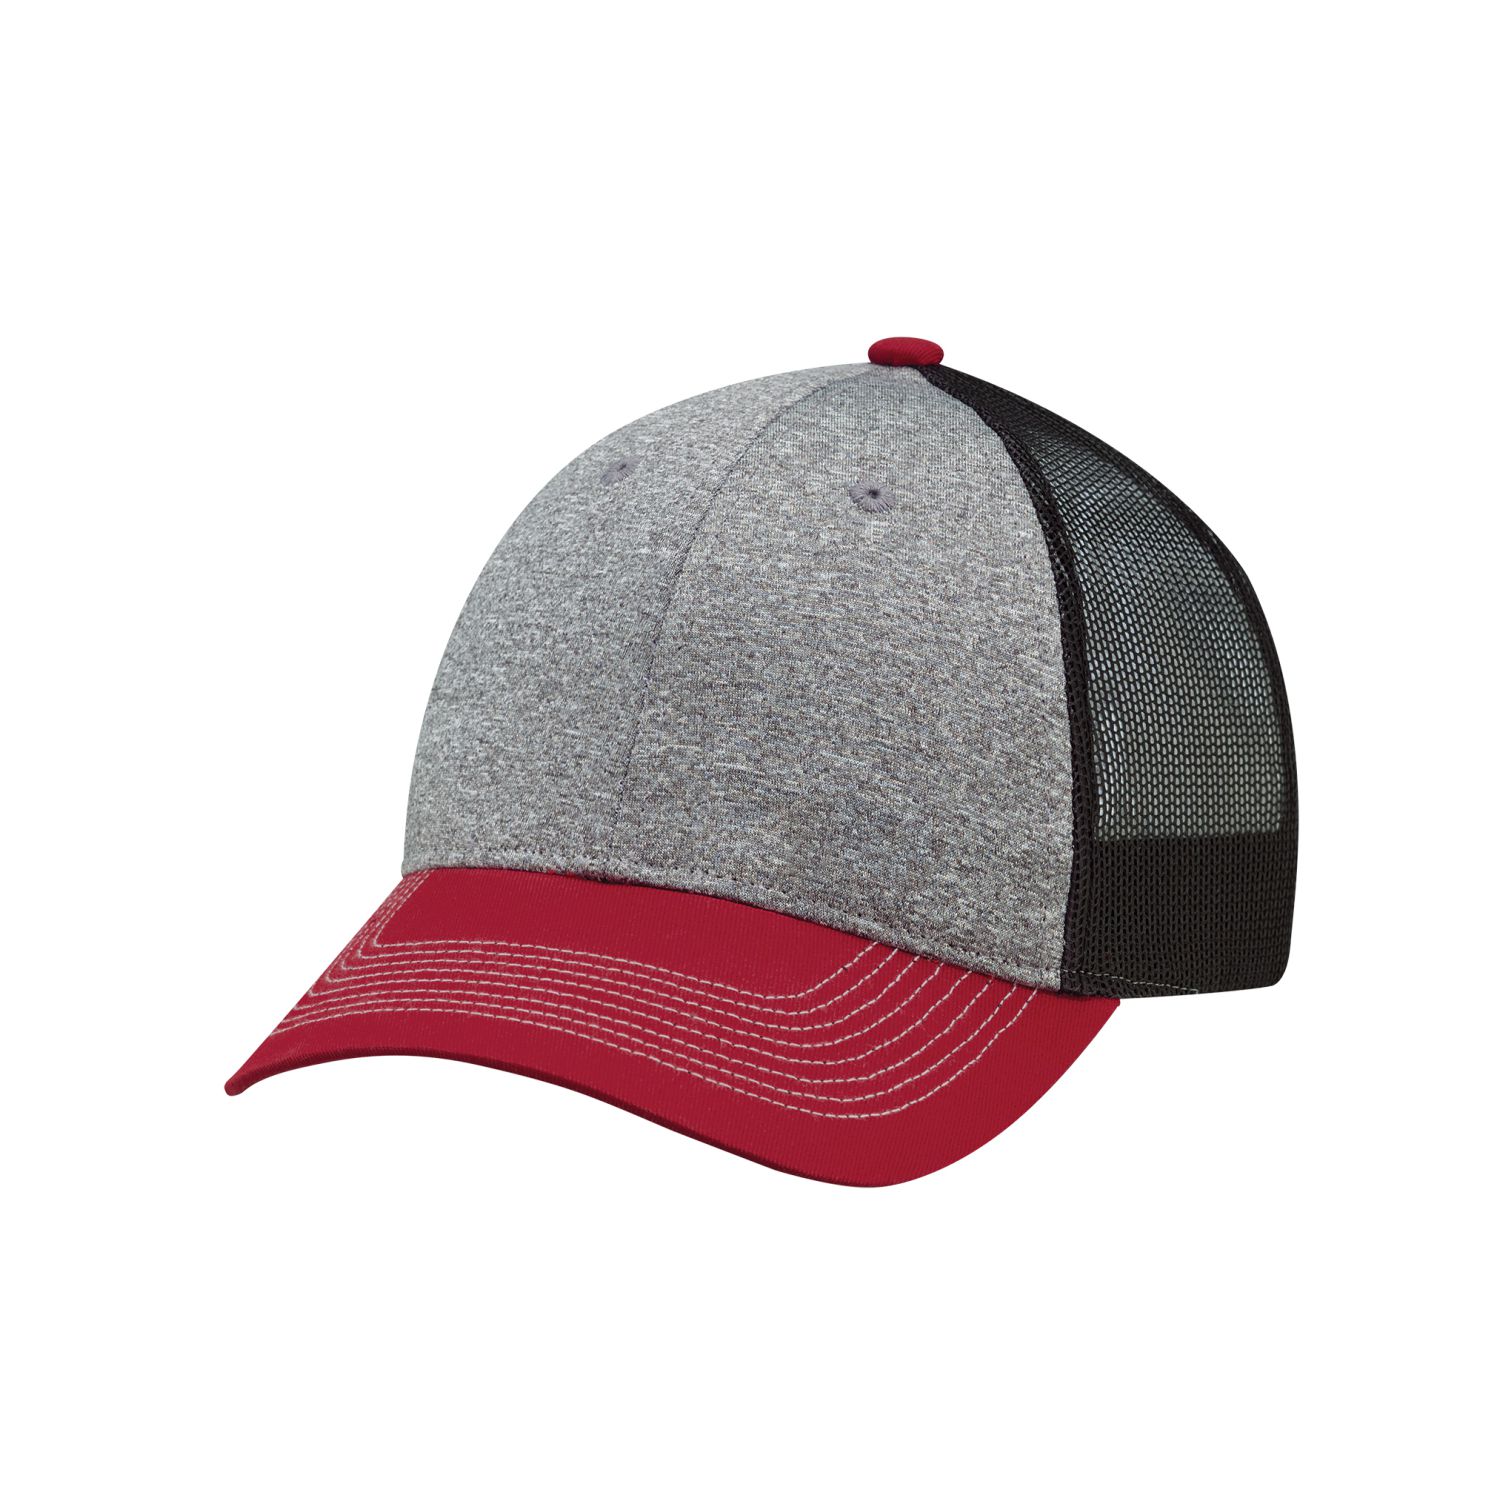 AJM Cotton Drill / Polyester Heather / Nylon Mesh 6 Panel Constructed Full-Fit Hat (Mesh Back) #4G645M Red / Charcoal / Black